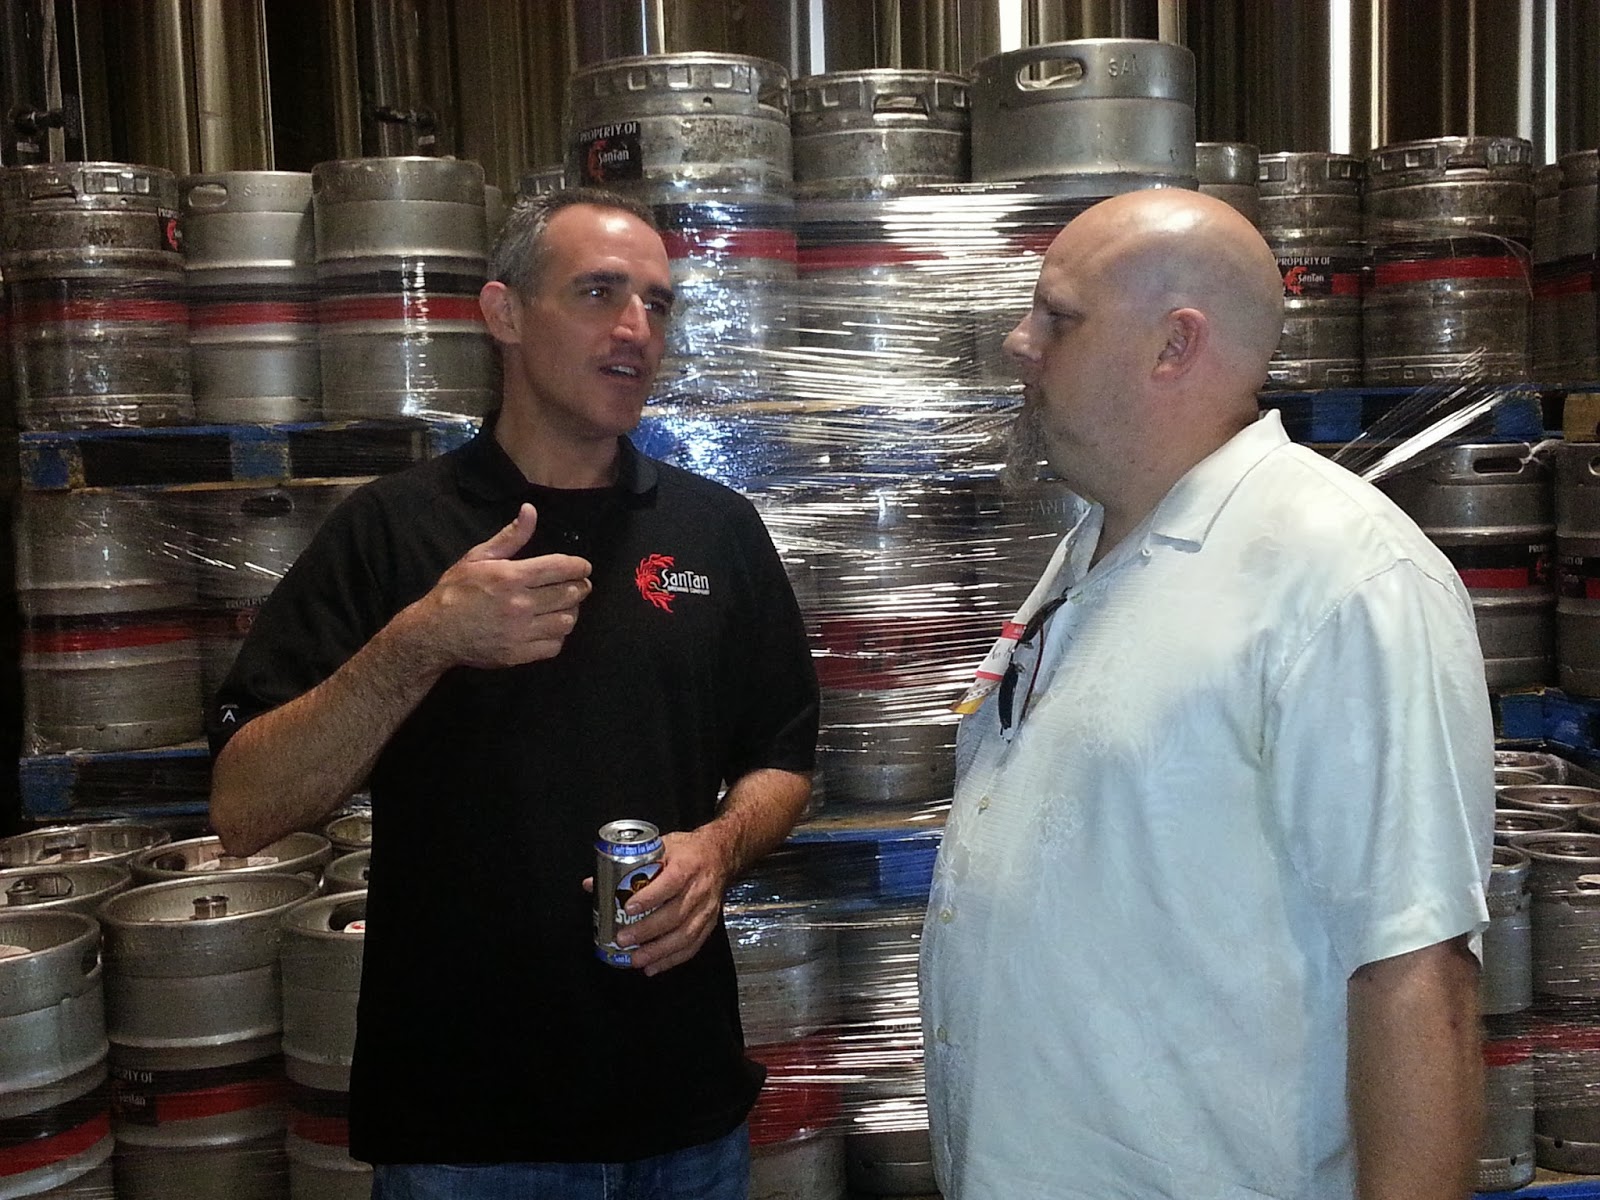 The Beer Czar Santan Brewing Company S Grand Opening Celebration